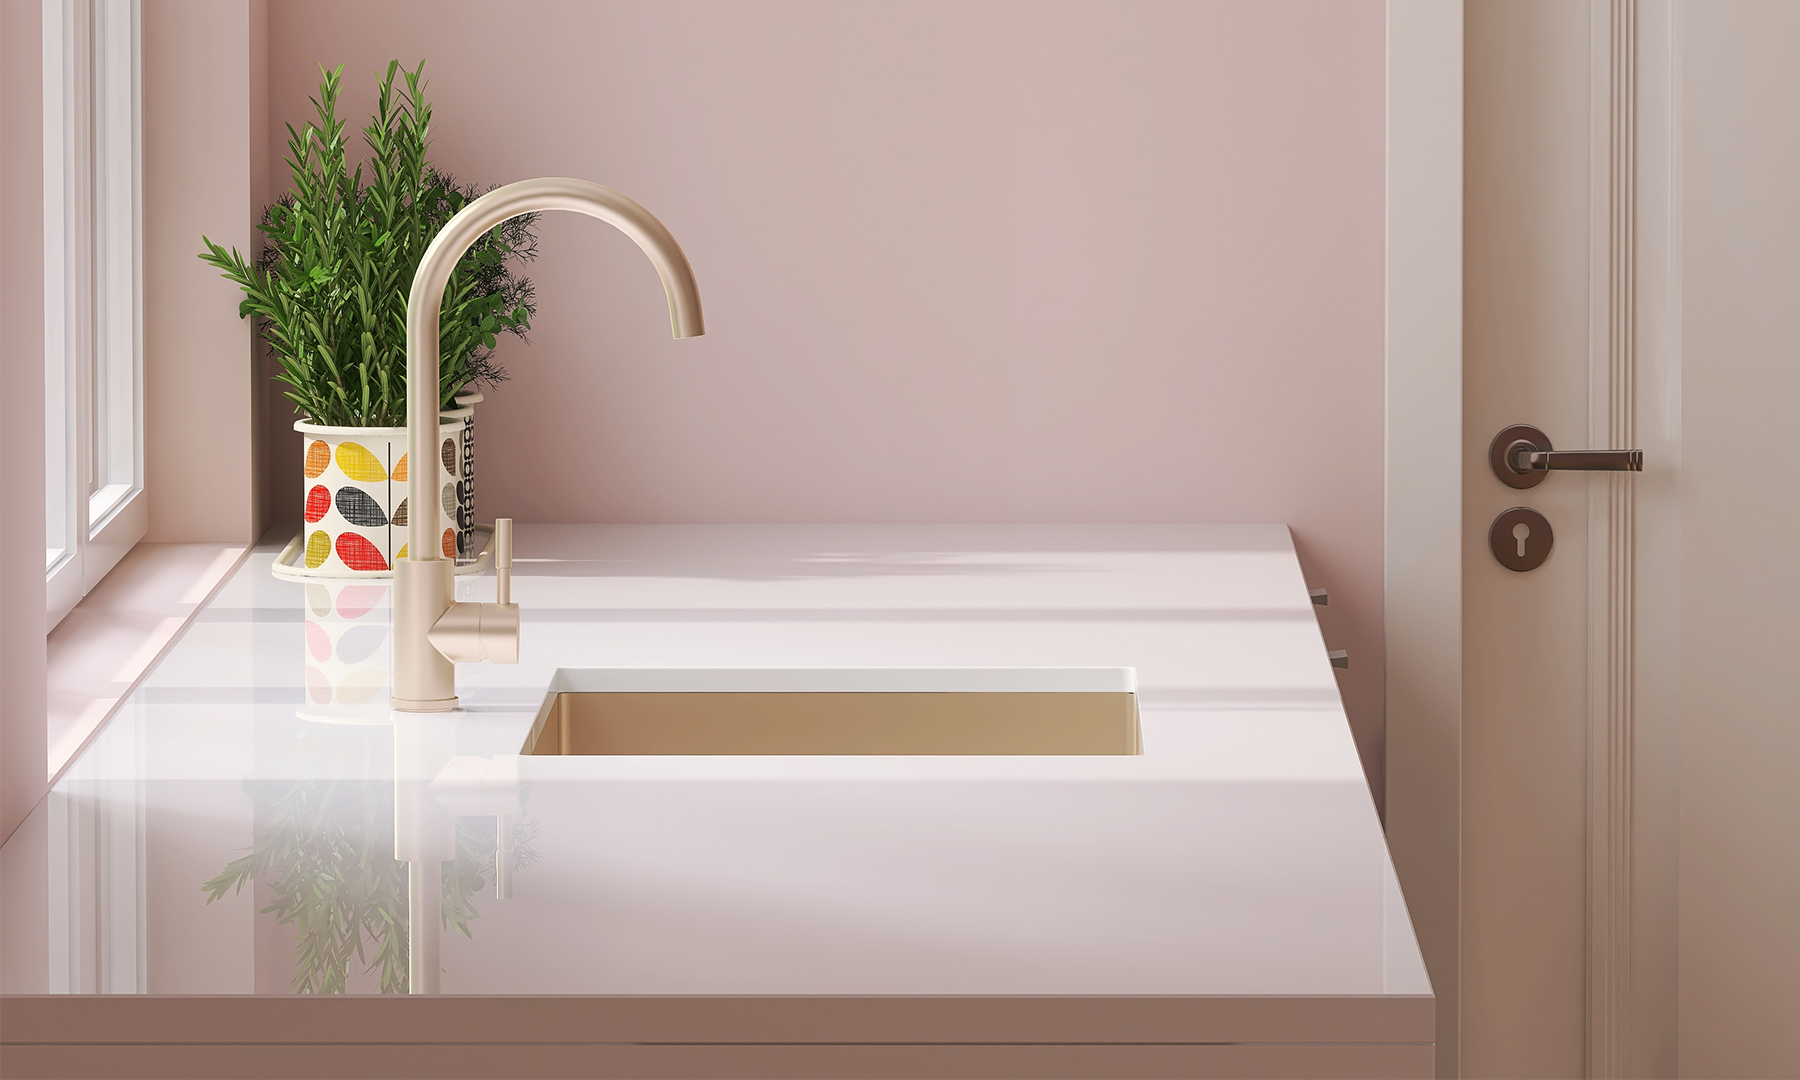 Laminate countertop in white with rose gold faucet and light pink walls